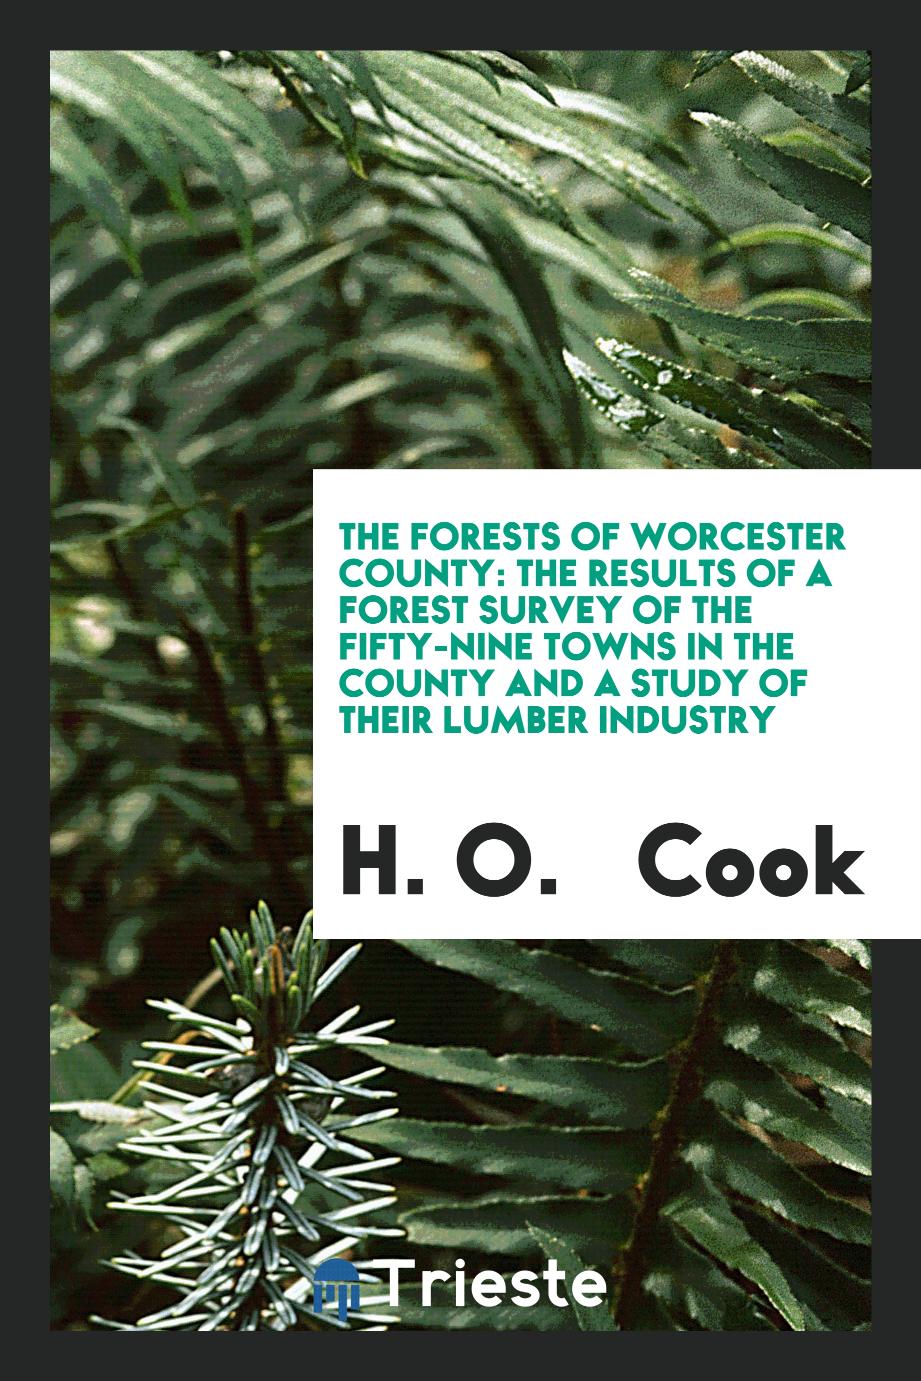 The Forests of Worcester County: The Results of a Forest Survey of the Fifty-Nine Towns in the County and a Study of Their Lumber Industry